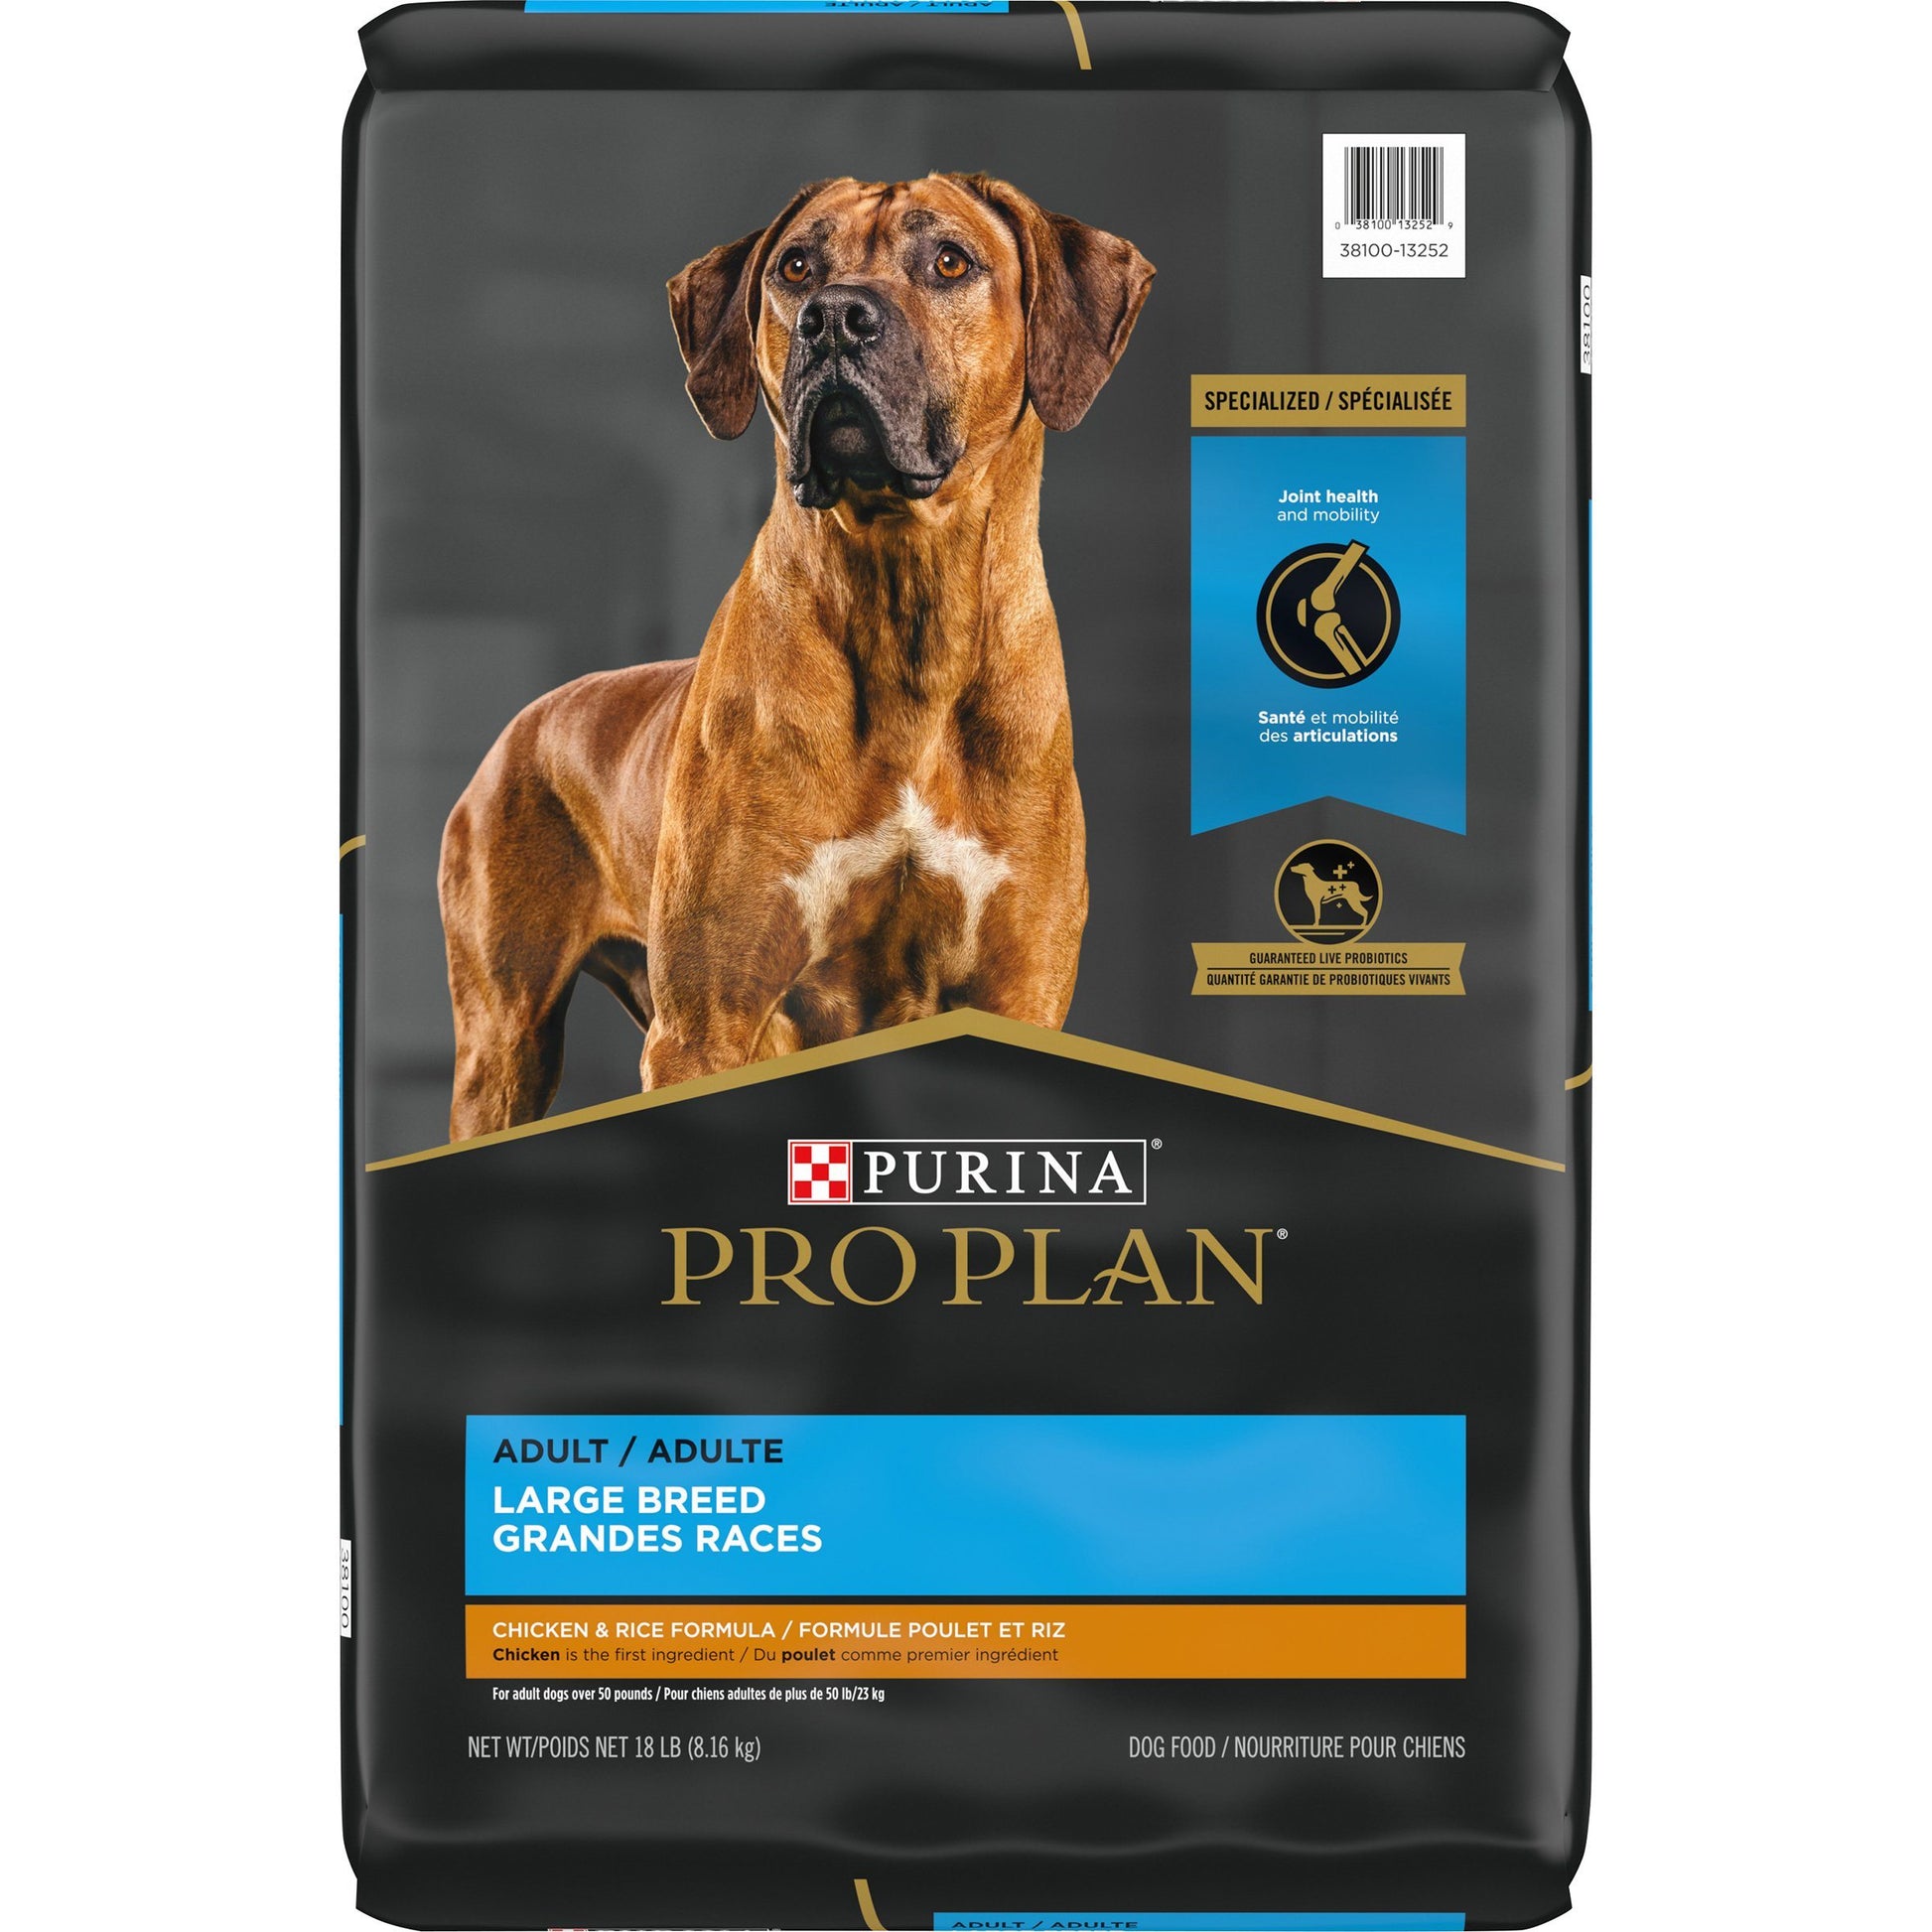 Purina Pro Plan Joint Health Large Breed Dog Food Chicken & Rice Formula 8.16 Kg Dog Food 8.16 Kg | PetMax Canada